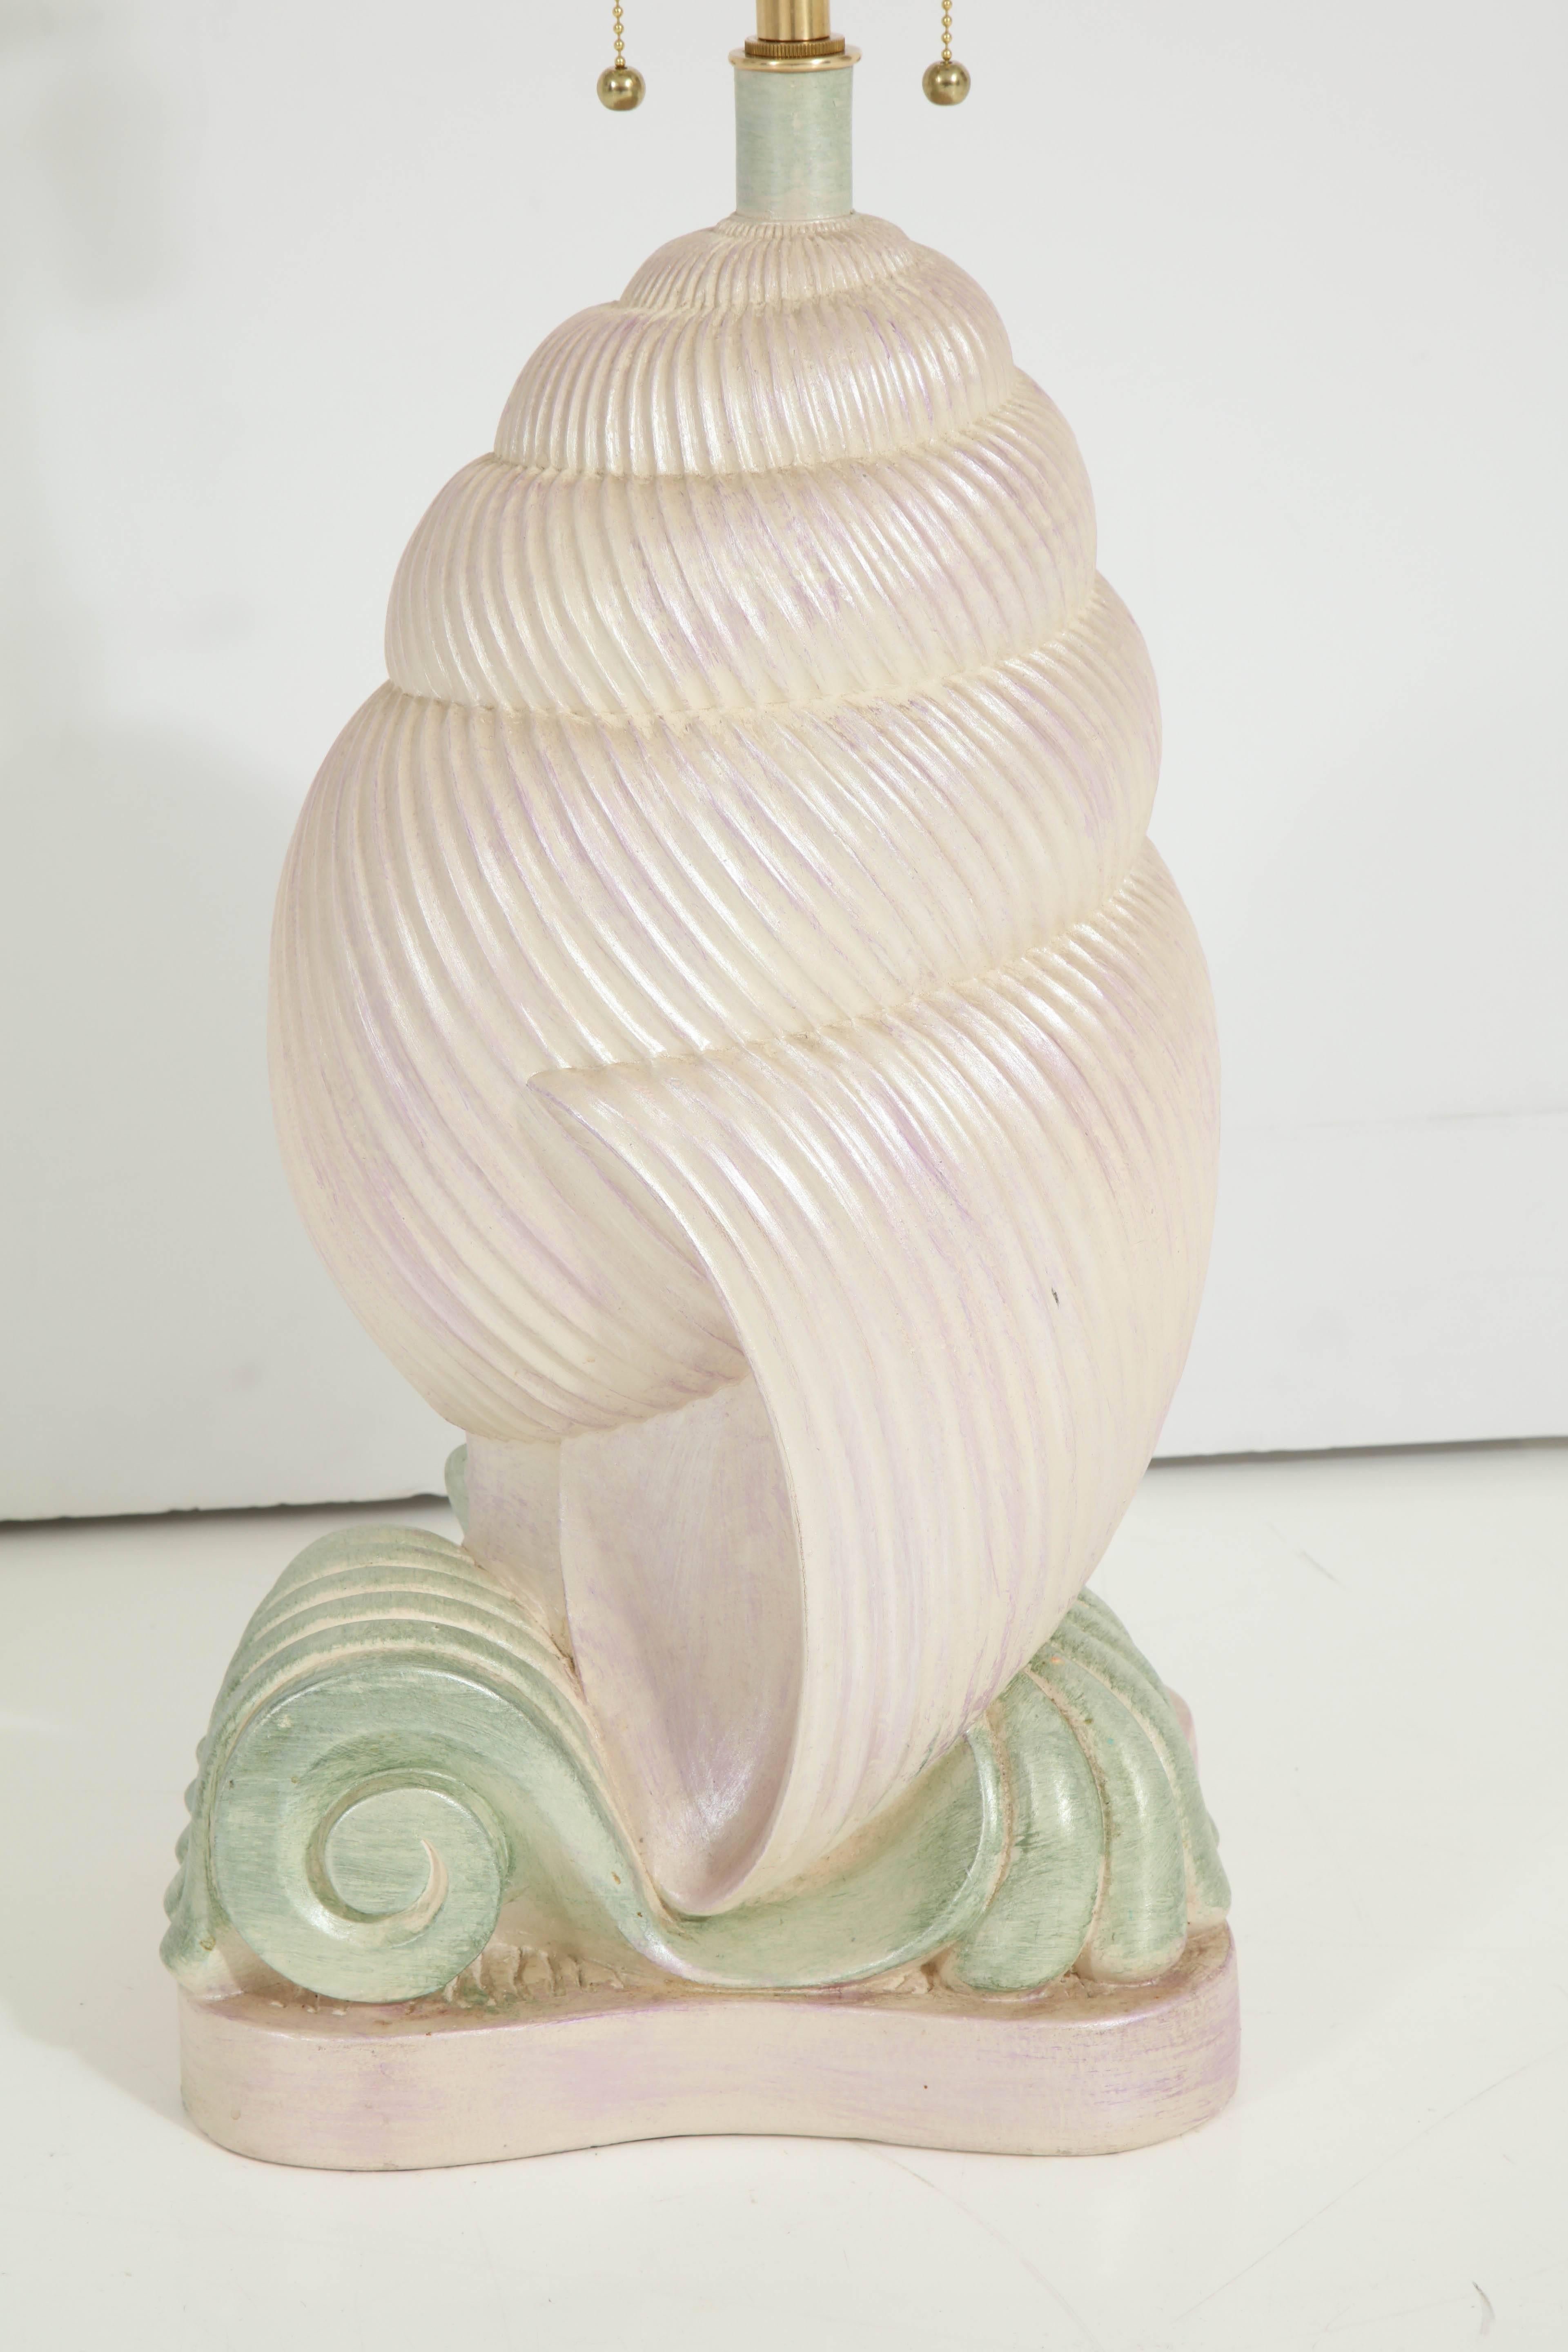 1980s Whimsical plaster conch shell lamp.
The lamp has been newly rewired for the US with a polished brass double cluster that takes standard light bulbs.
Measure: The overall height of the lamp is 32